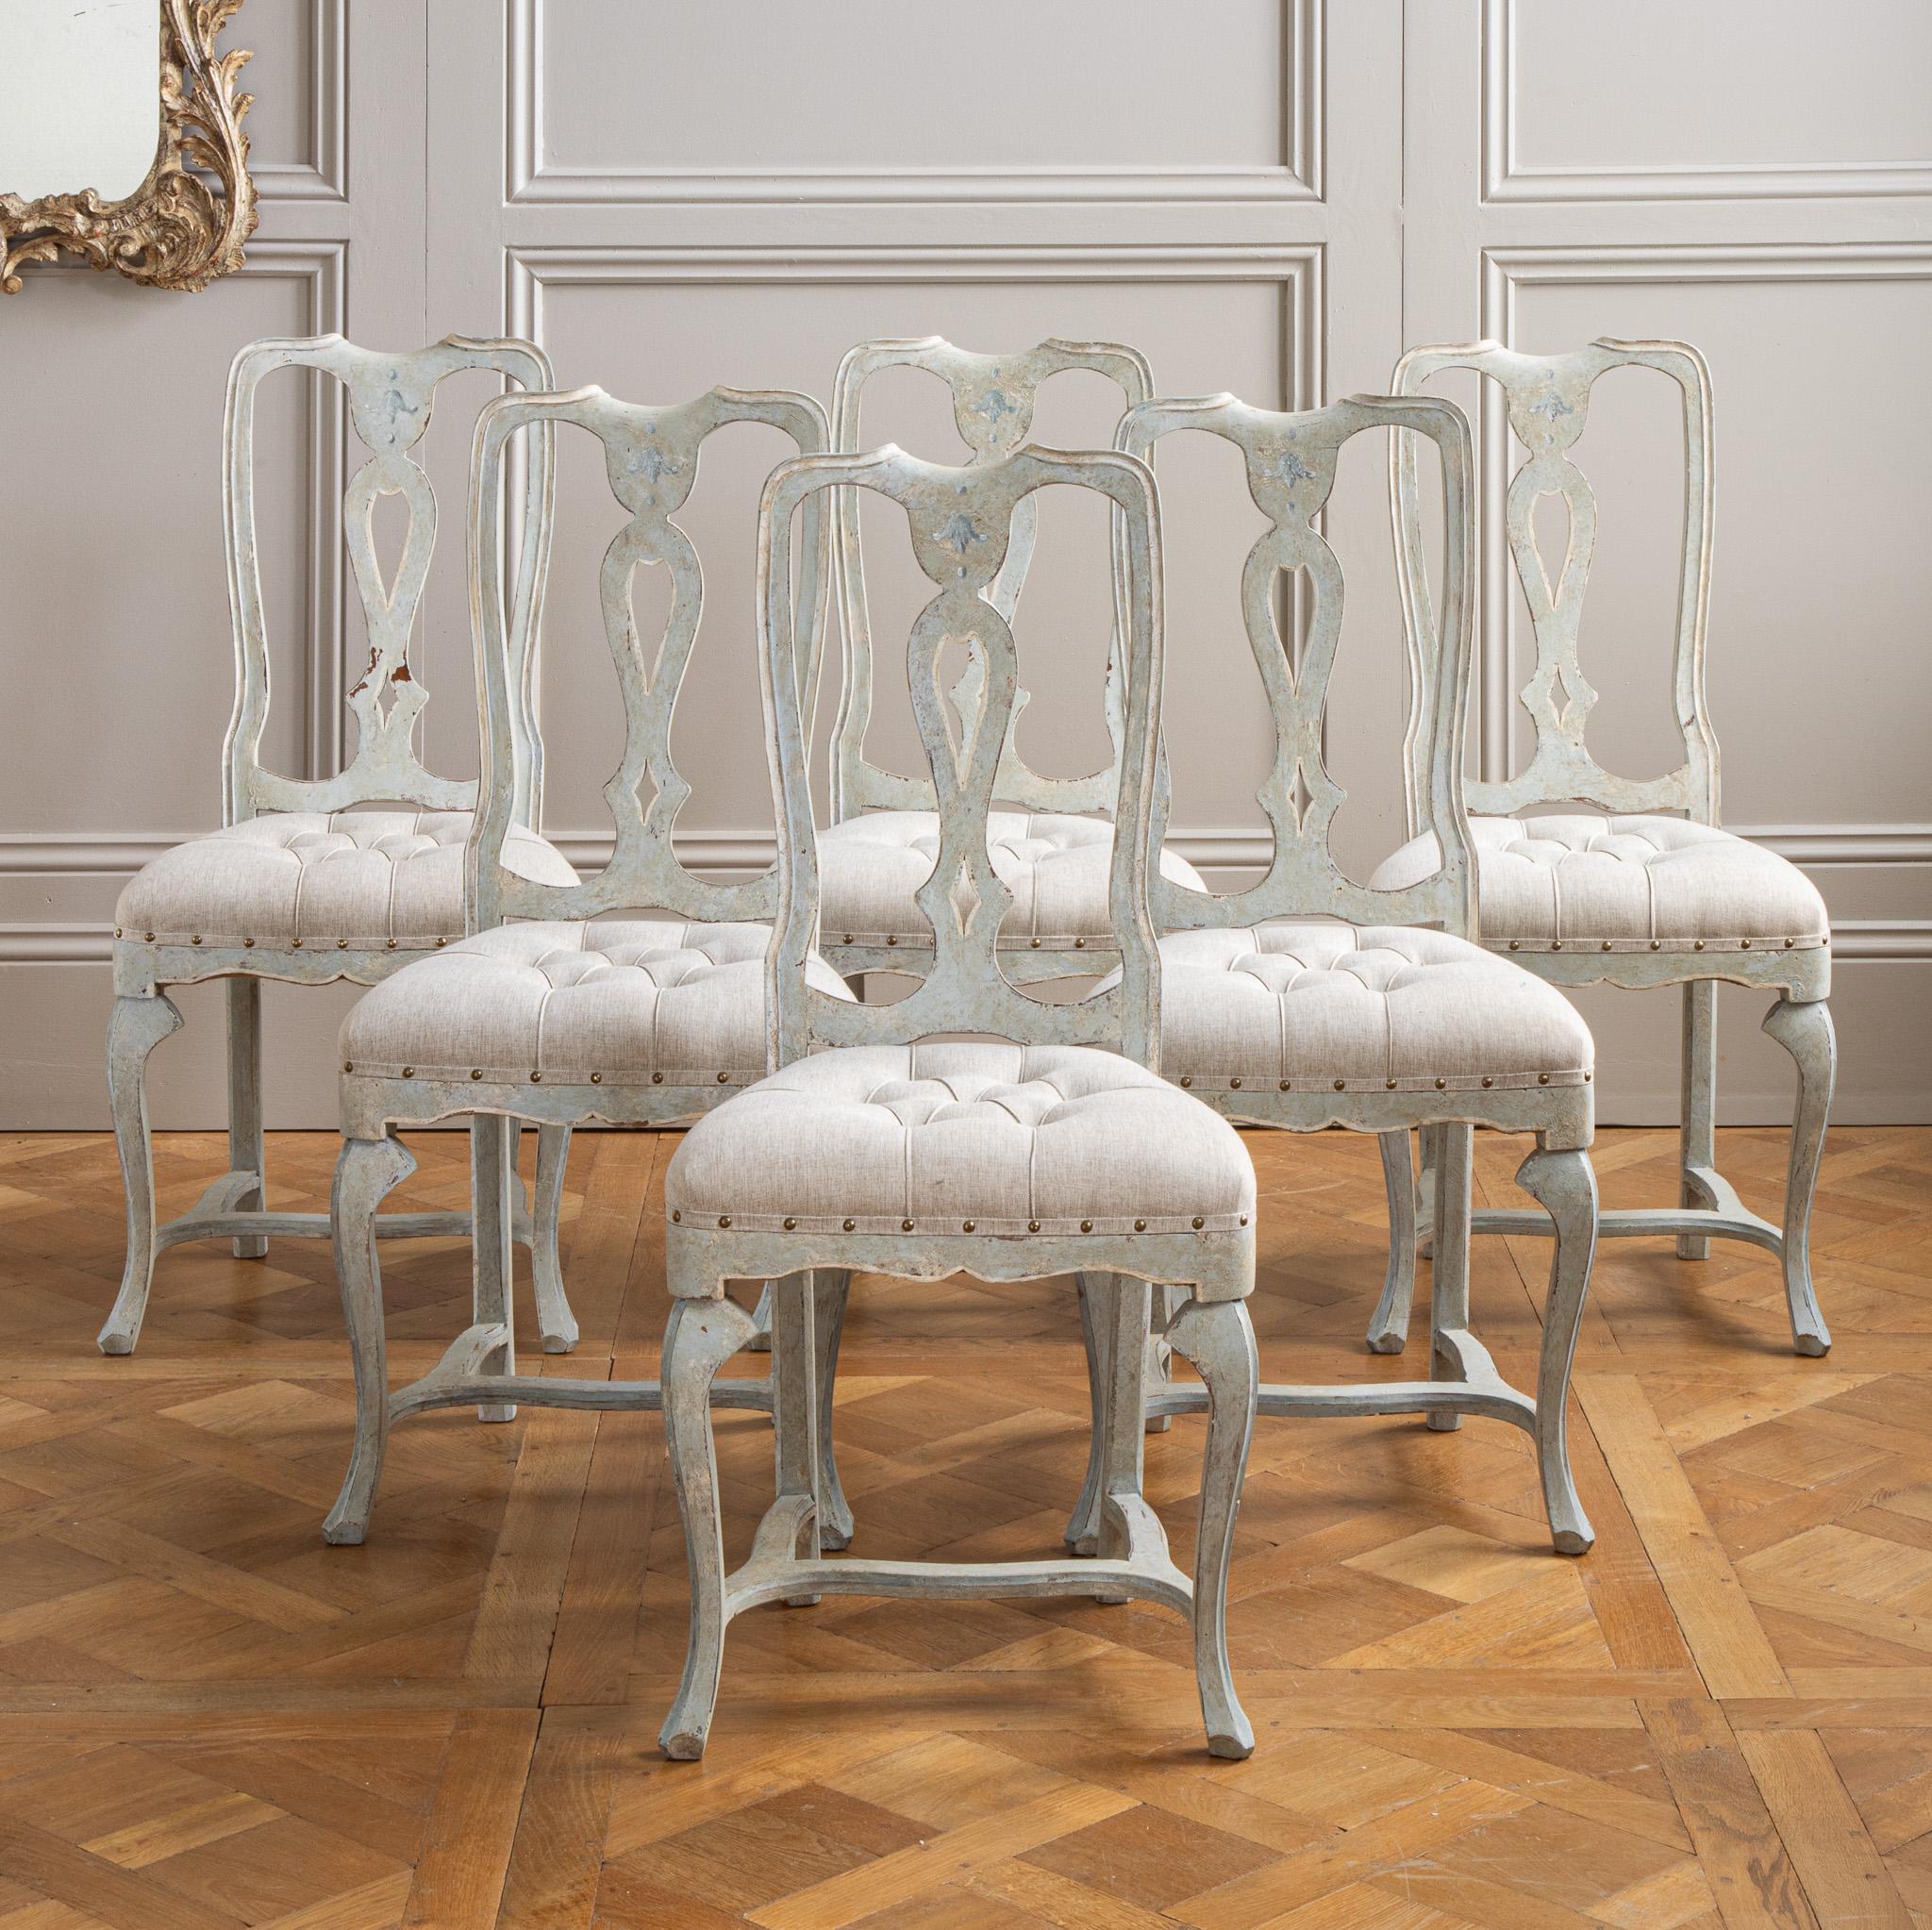 Indulge in the opulence of Venetian style dining with this set of 6 exquisite chairs. With intricate, handcrafted details and luxurious materials, these chairs add a touch of elegance to any dining experience. Elevate your dining room.